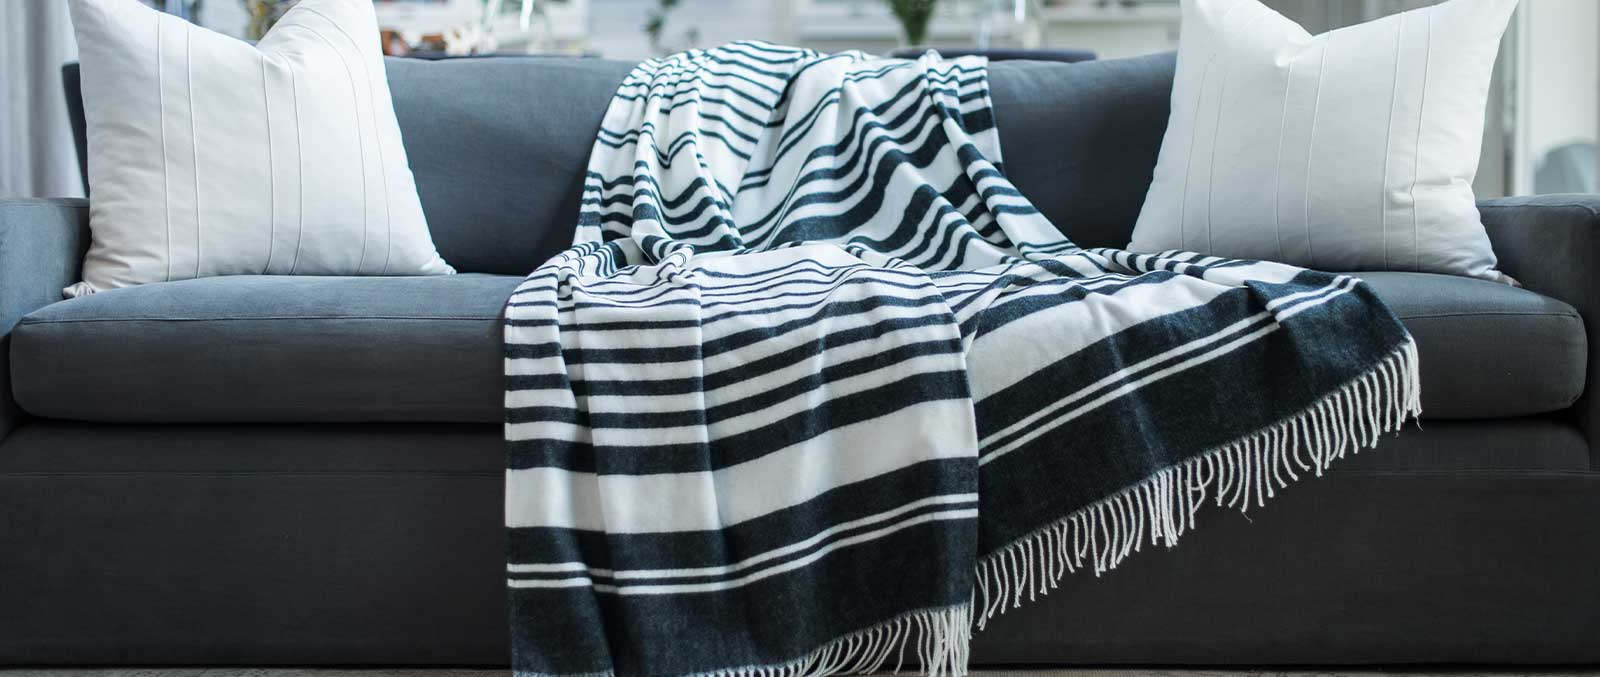 Plaid and Striped Throws By Thula Tula